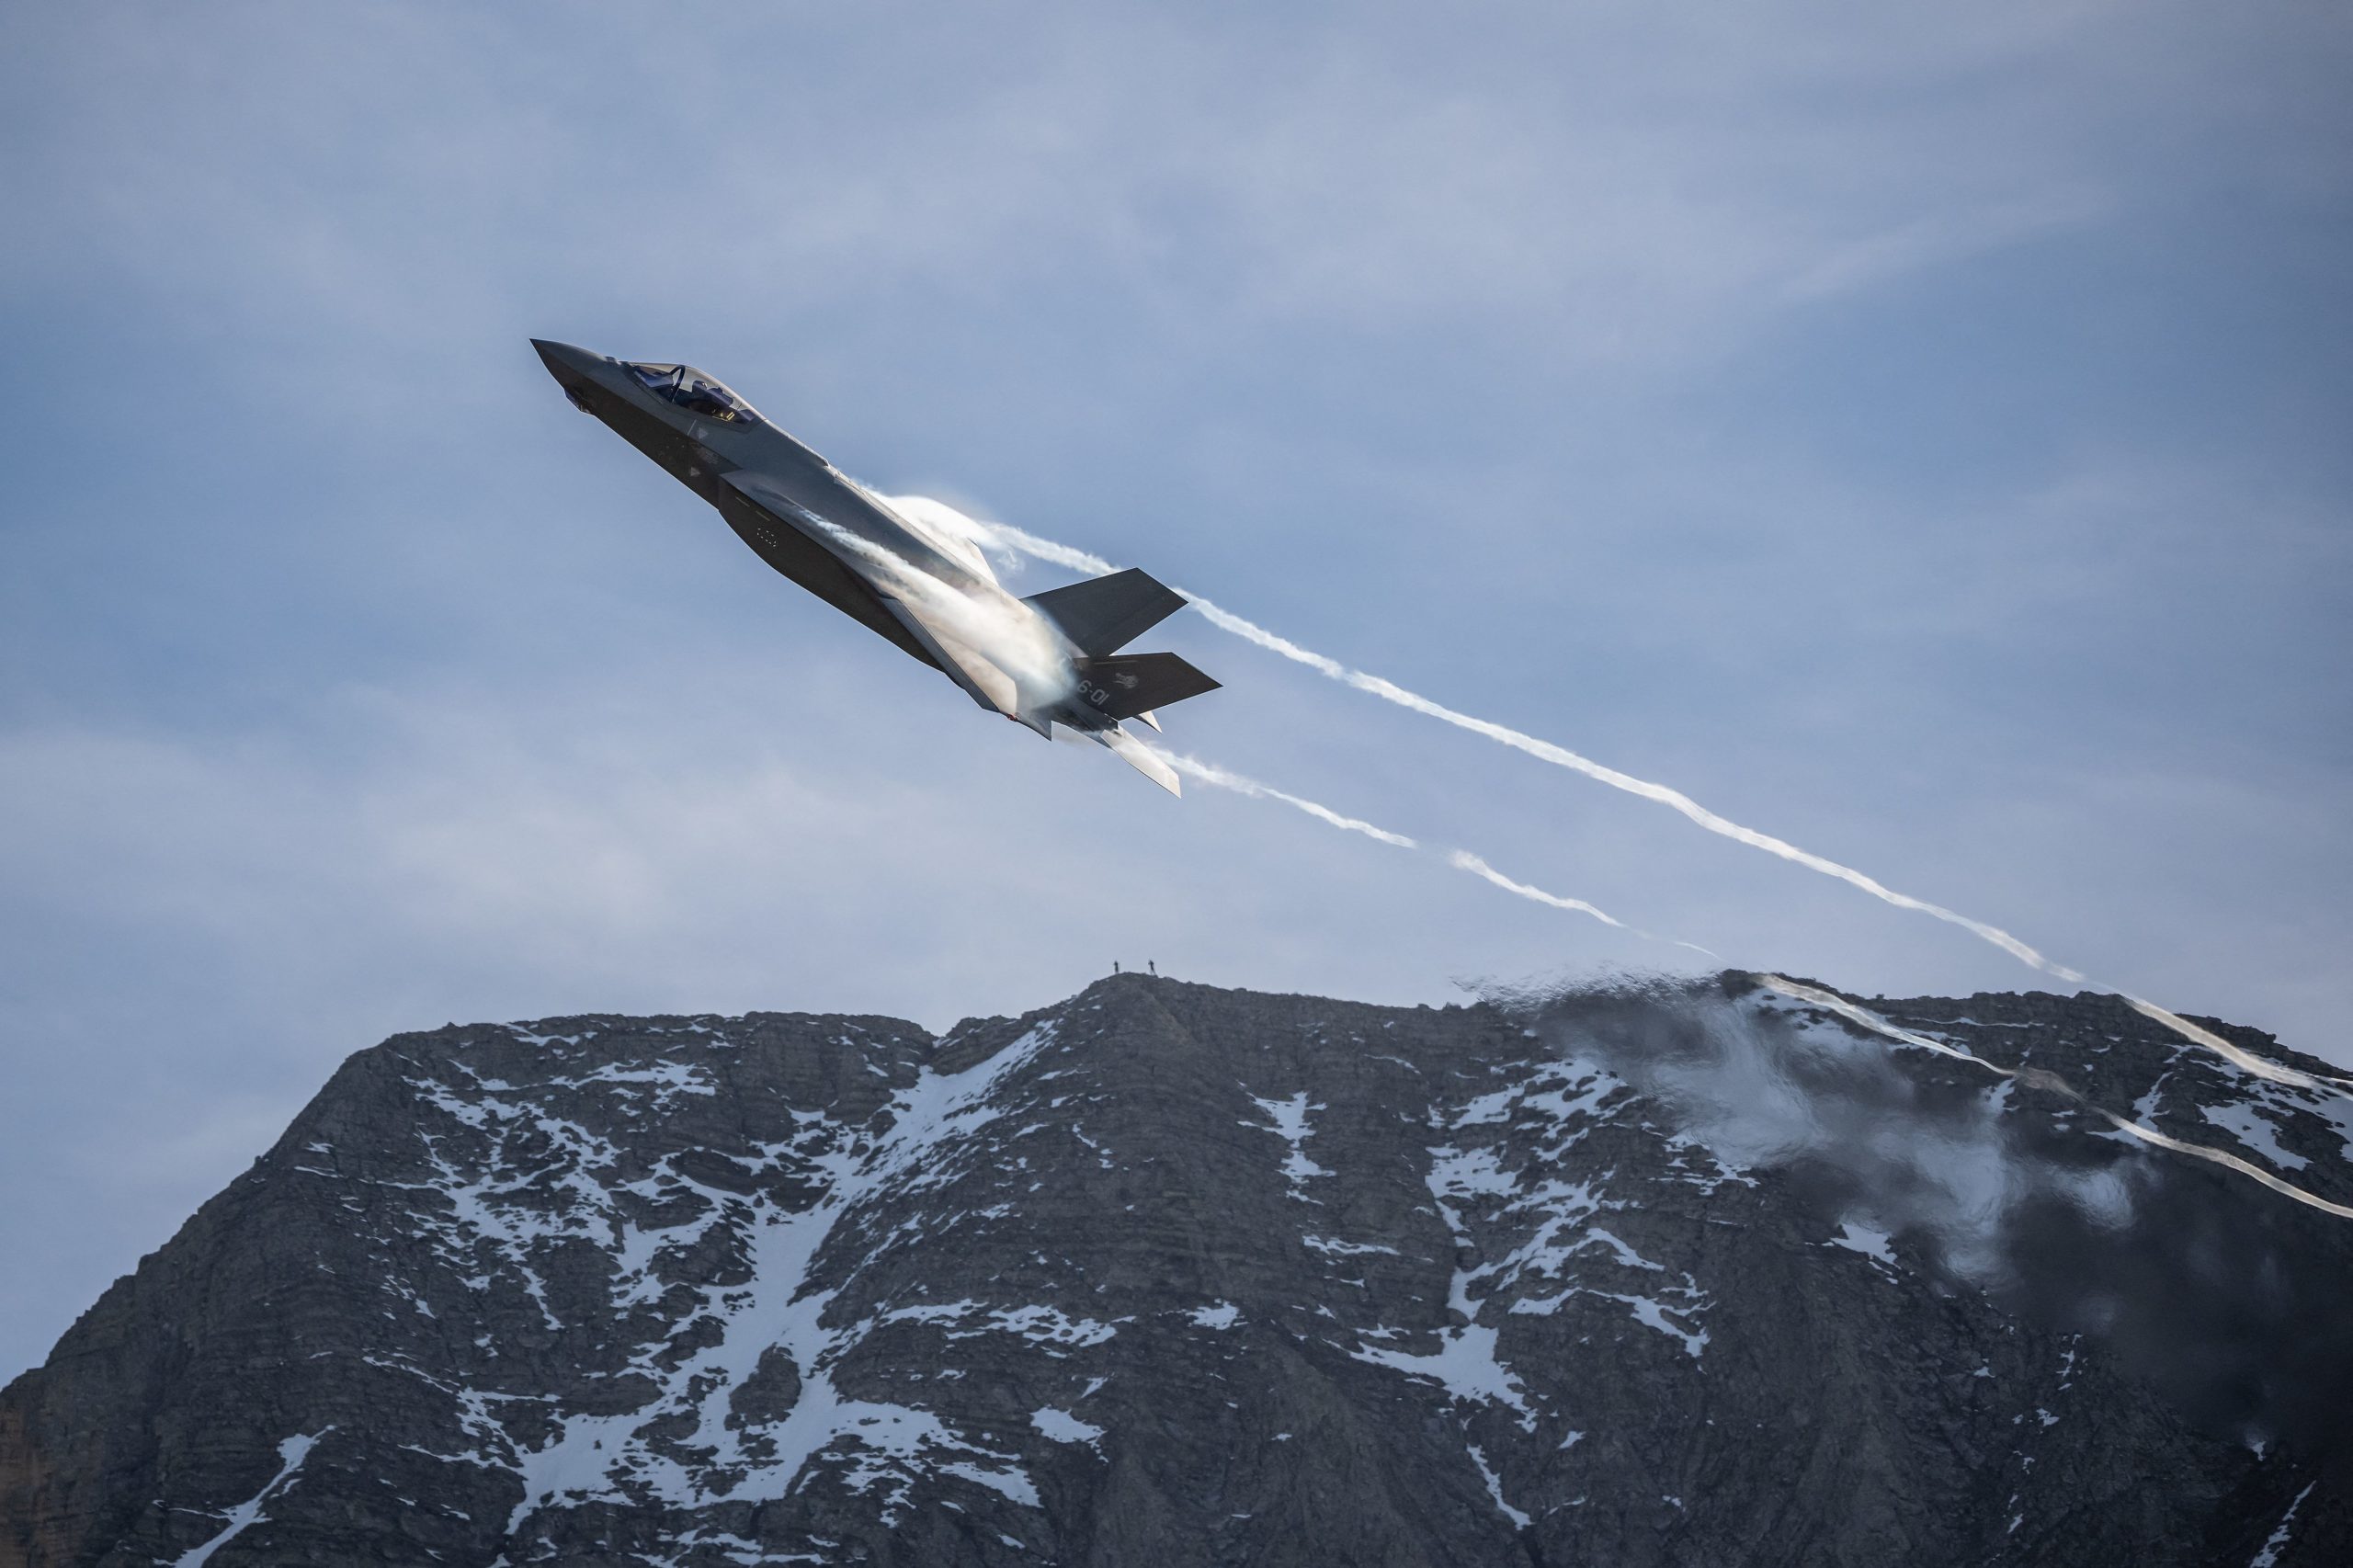 An Italian Air Force Lockheed Martin F-35A Lightning II performs during the annual live fire event over the Axalp in the Bernese Oberland, on October 19, 2022. - At an altitude of 2,200 meters above sea level, spectators attended a unique aviation display performed at the highest air force firing range in Europe. (Photo by Fabrice COFFRINI / AFP) (Photo by FABRICE COFFRINI/AFP via Getty Images)